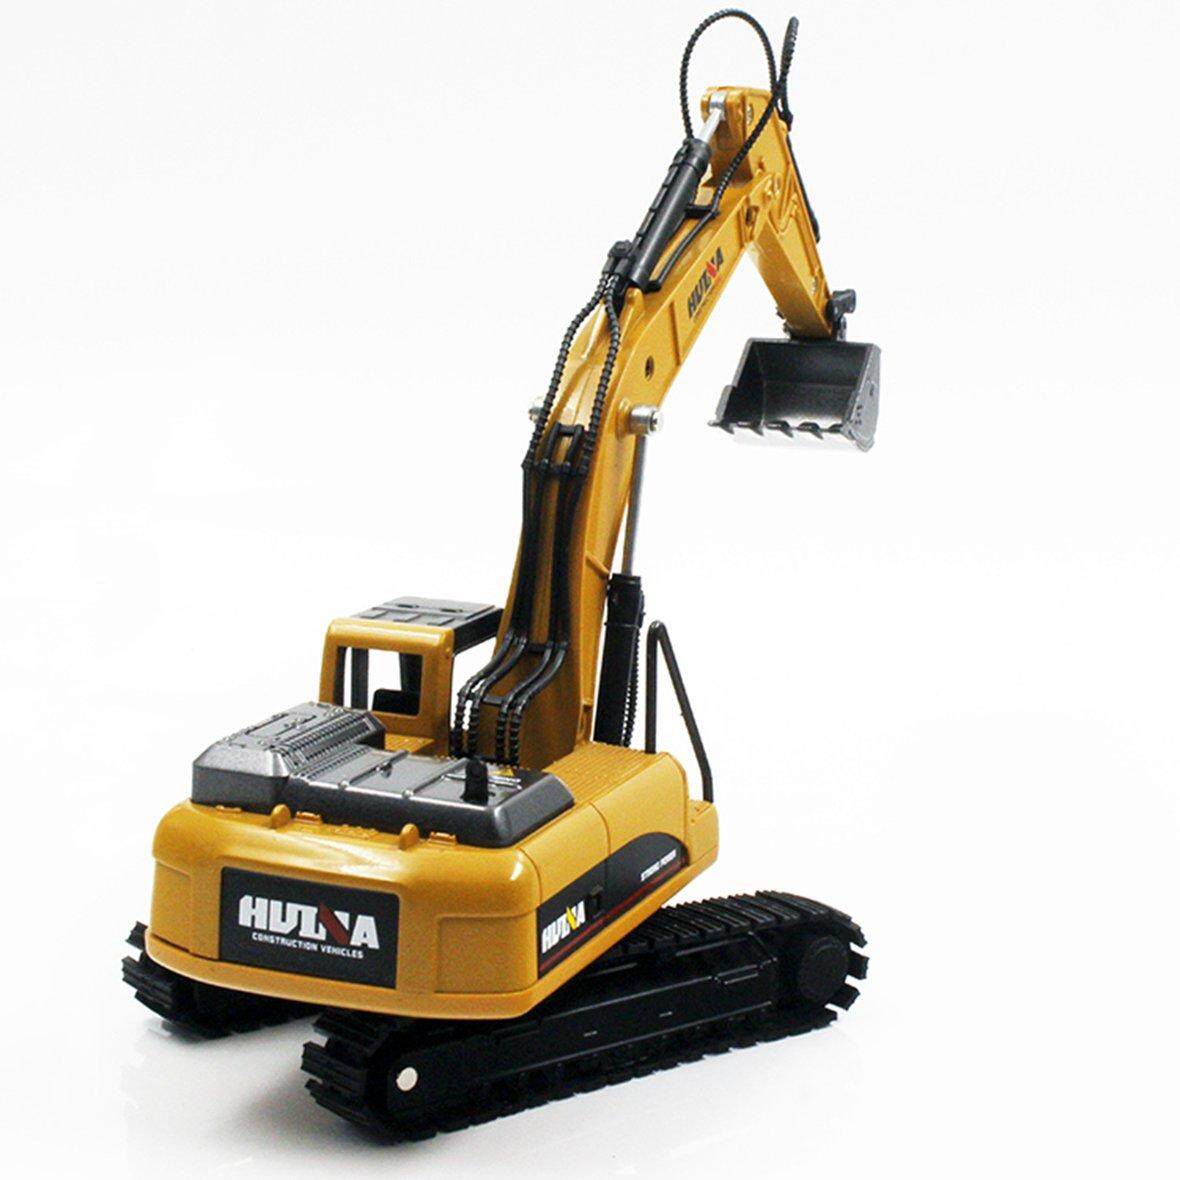 Hot Sellers [Best new year gift] HUINA TOYS NO.1710 1/50 Alloy Excavator Truck Car Engineering Model Kids Toys